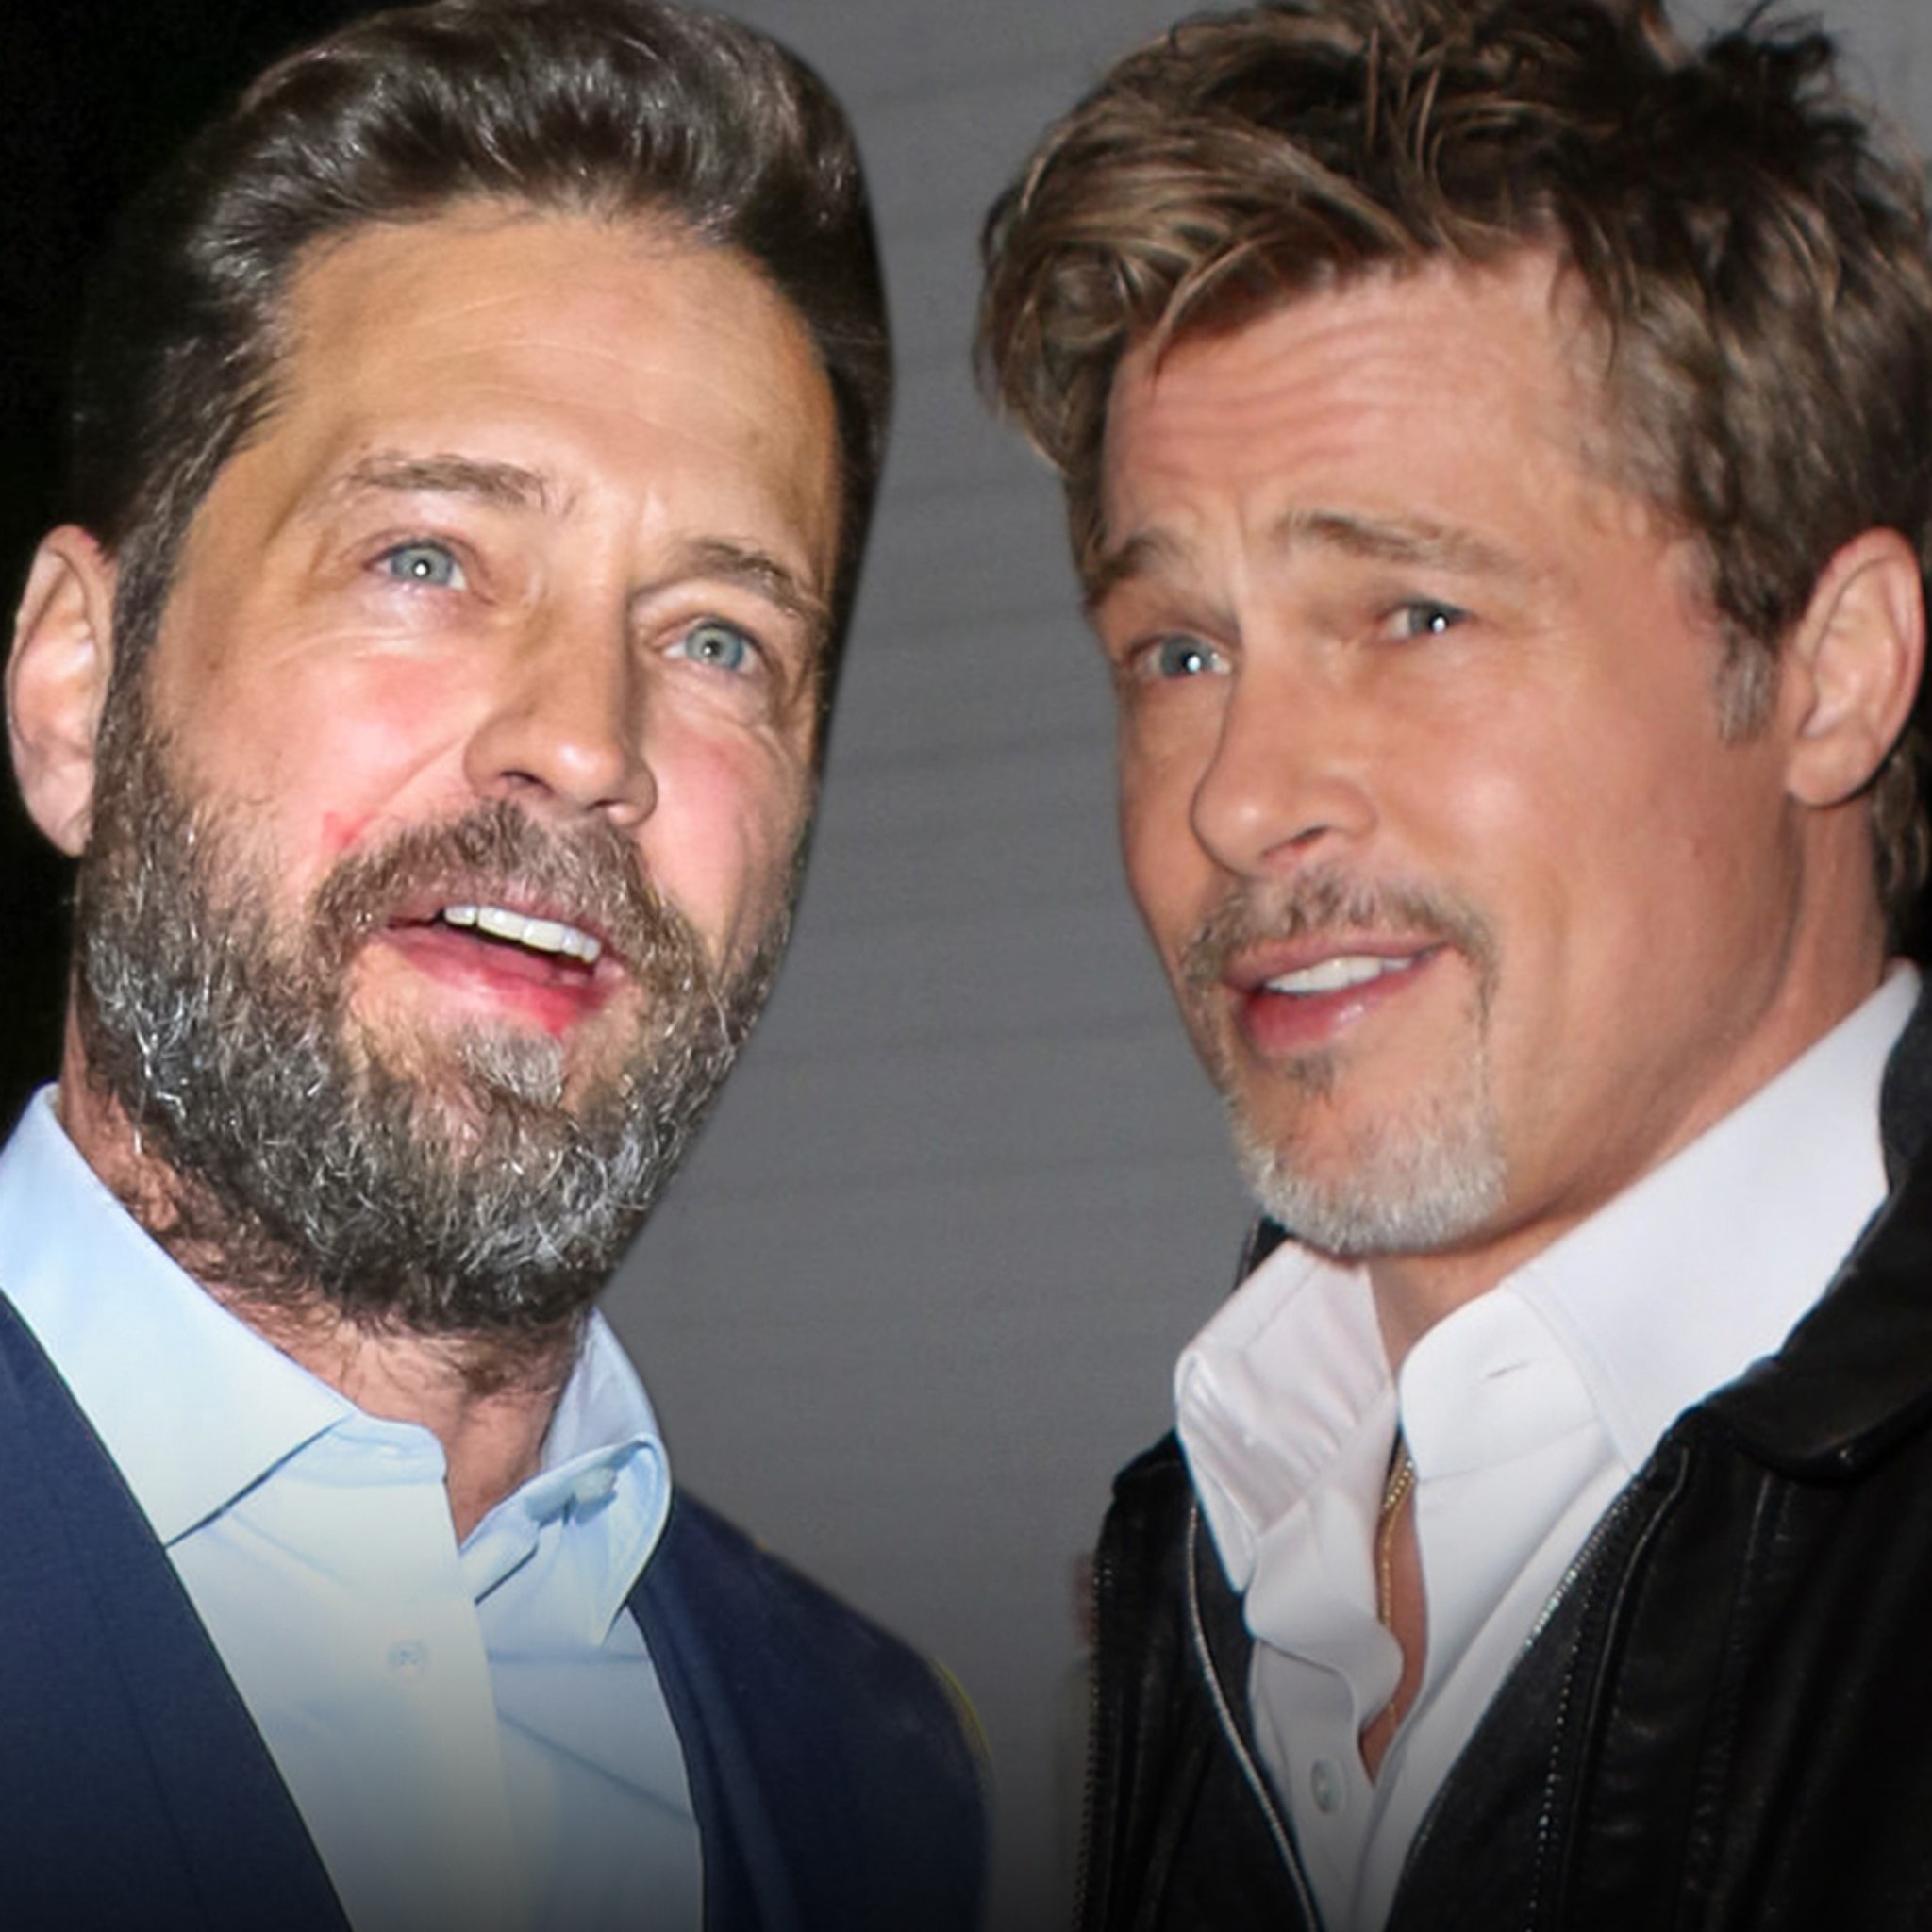 Brad Pitt Wouldn't Shower For Days Sometimes, Says Former Roommate